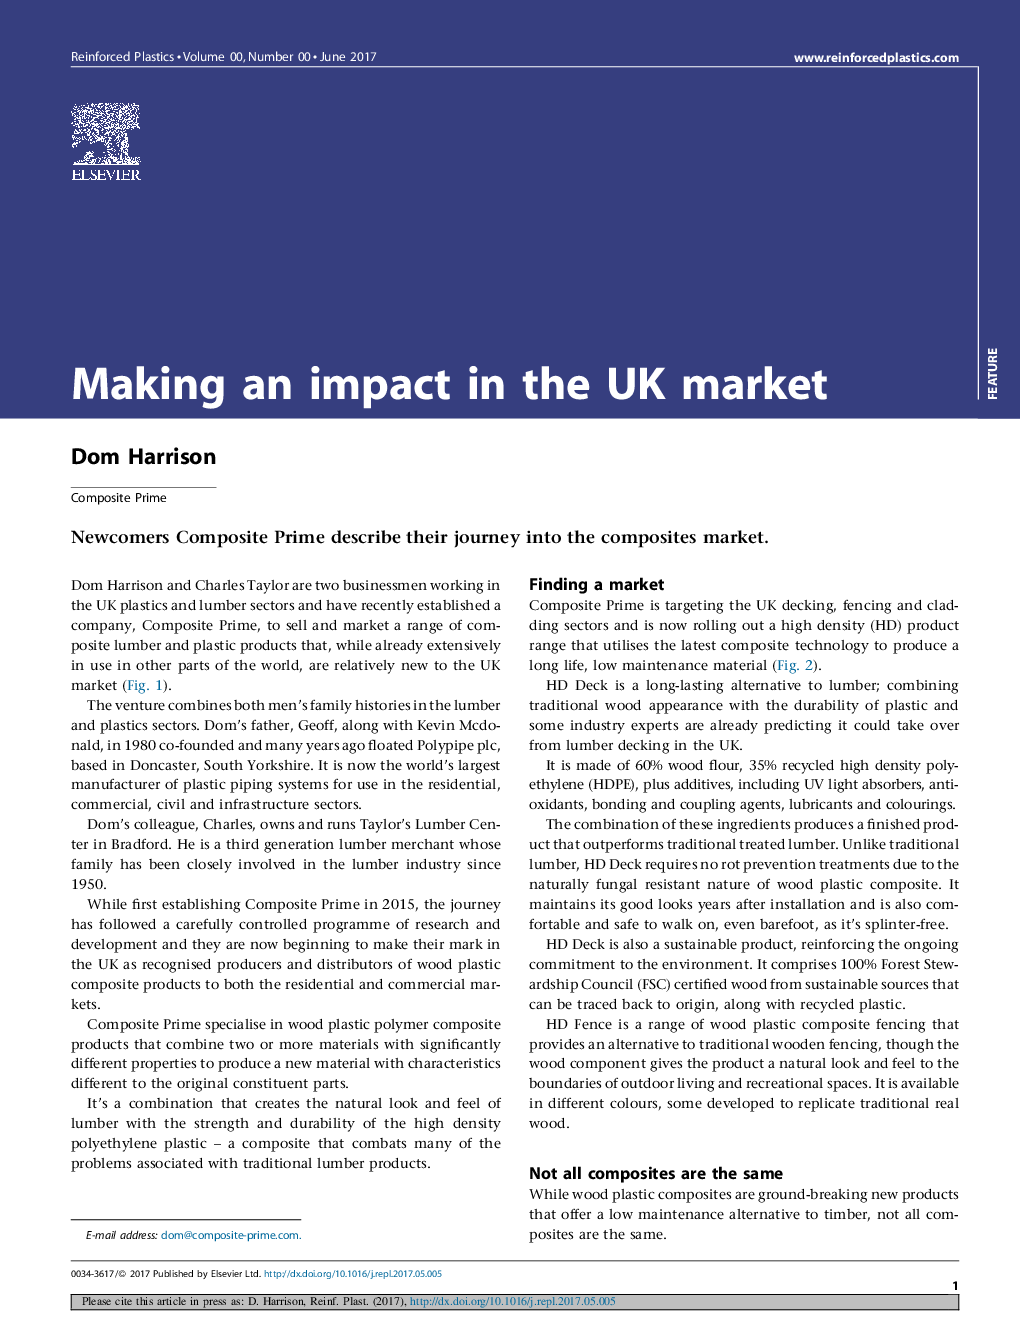 Making an impact in the UK market